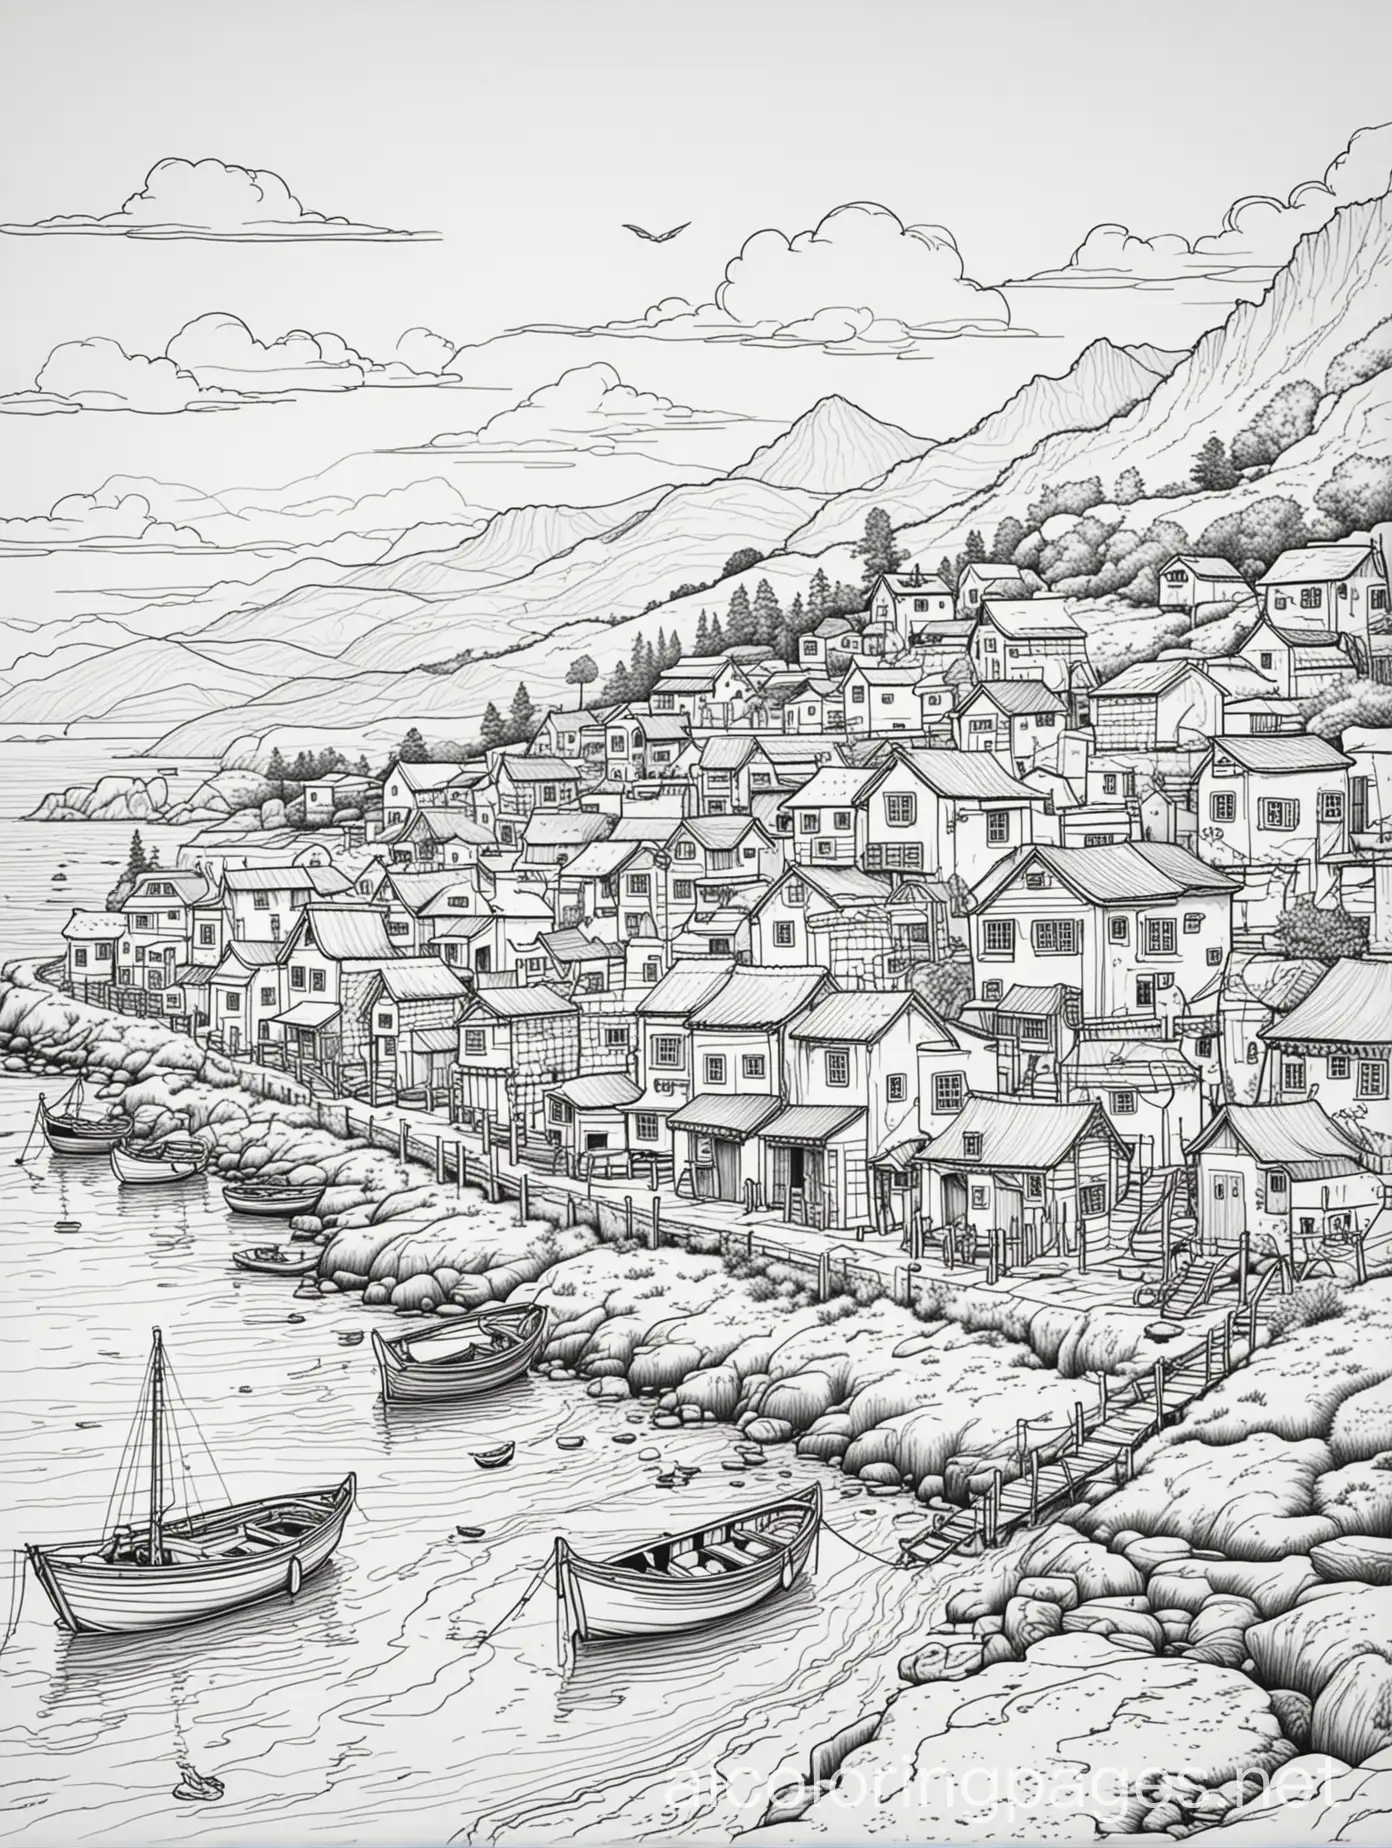 Fishing-Village-Coloring-Page-for-Kids-Simple-Line-Art-with-Ample-Space